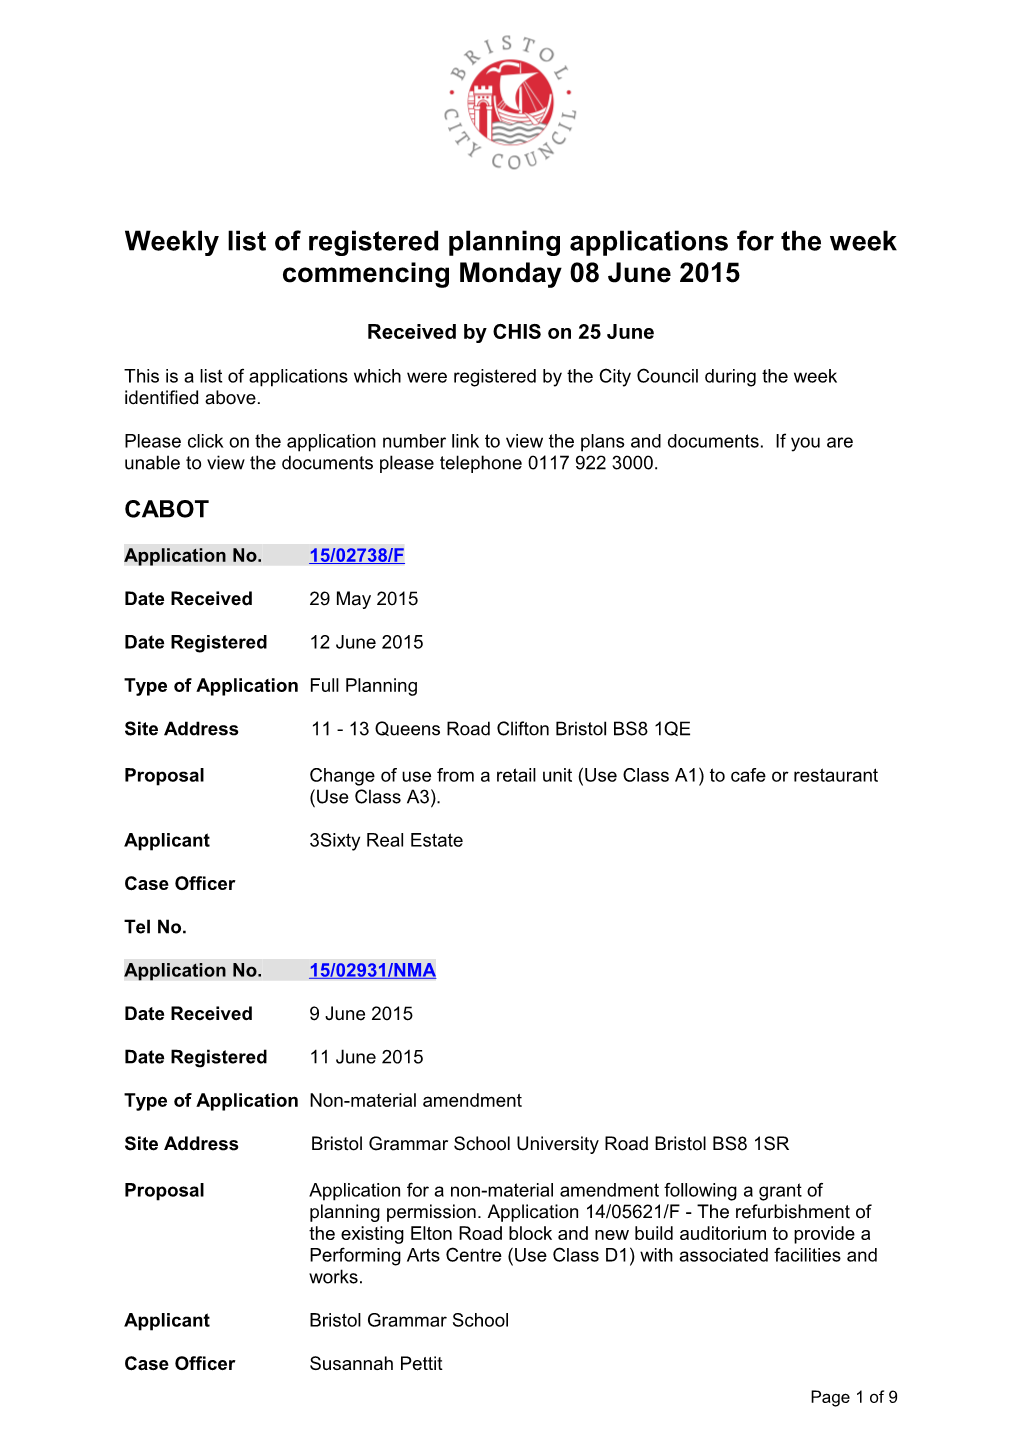 Weekly List of Registered Planning Applications for the Week Commencing Monday 08 June 2015